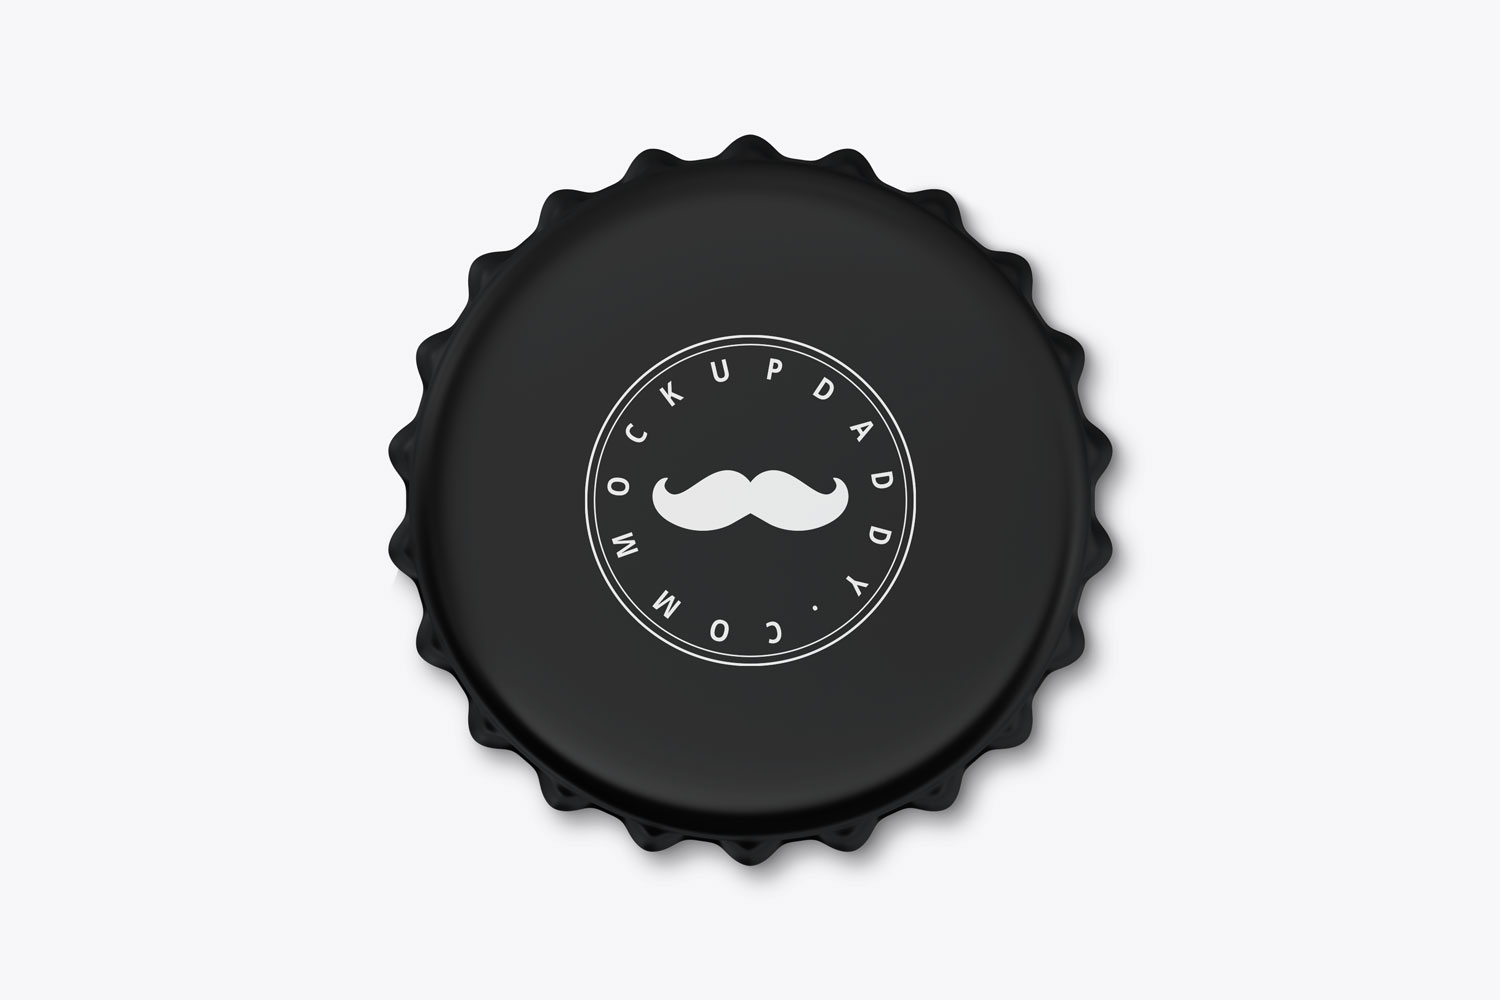 Black and white bottle cap mockup with a mustache design